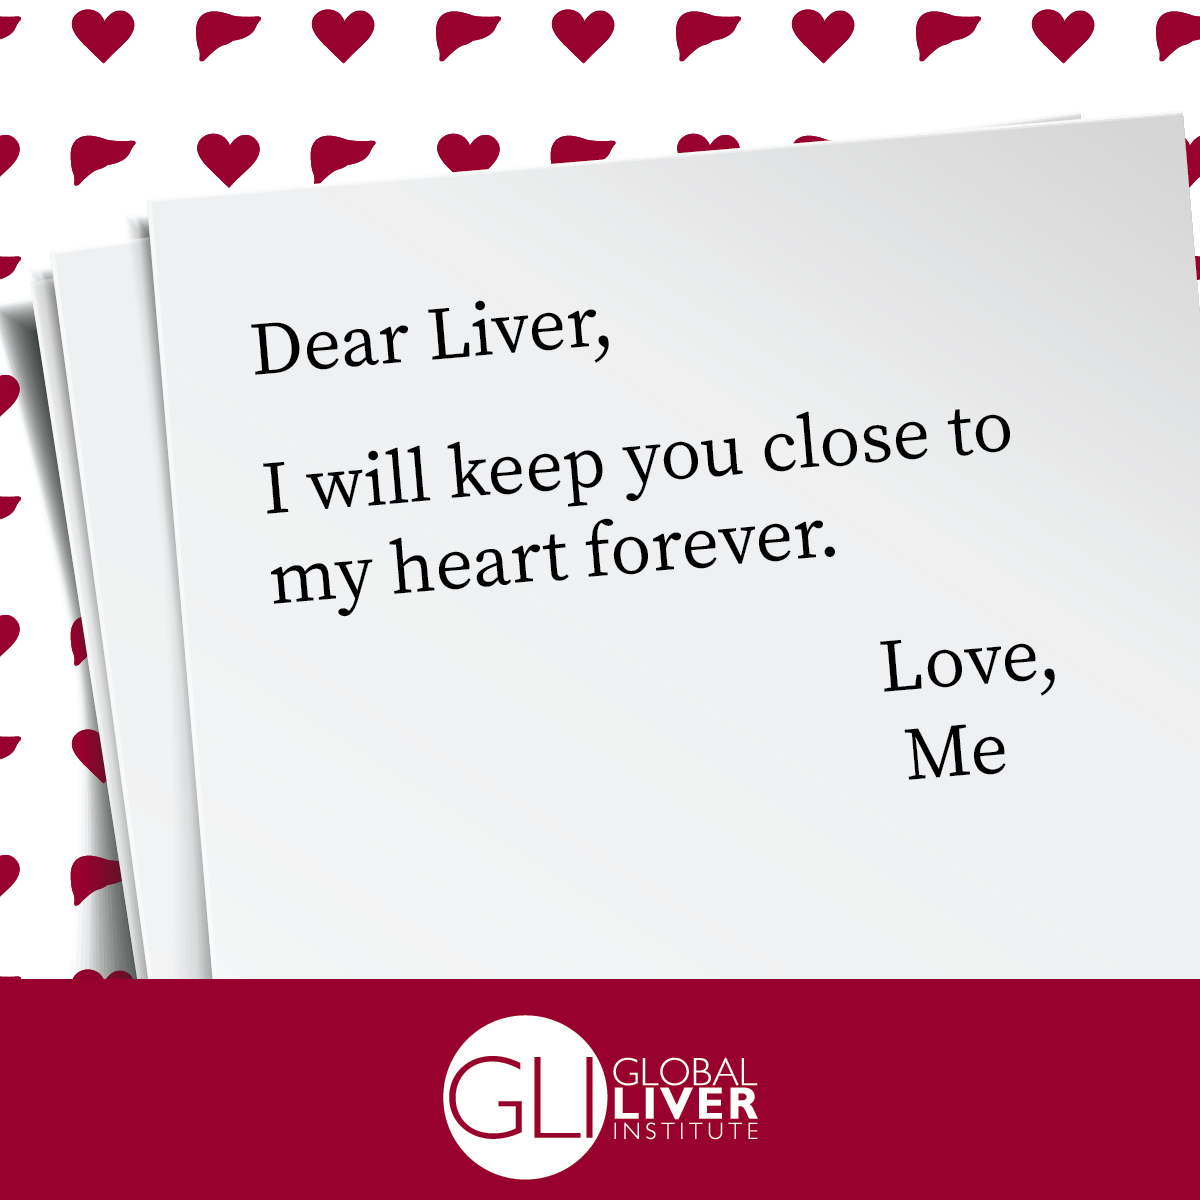 love-letter-to-liver08.png